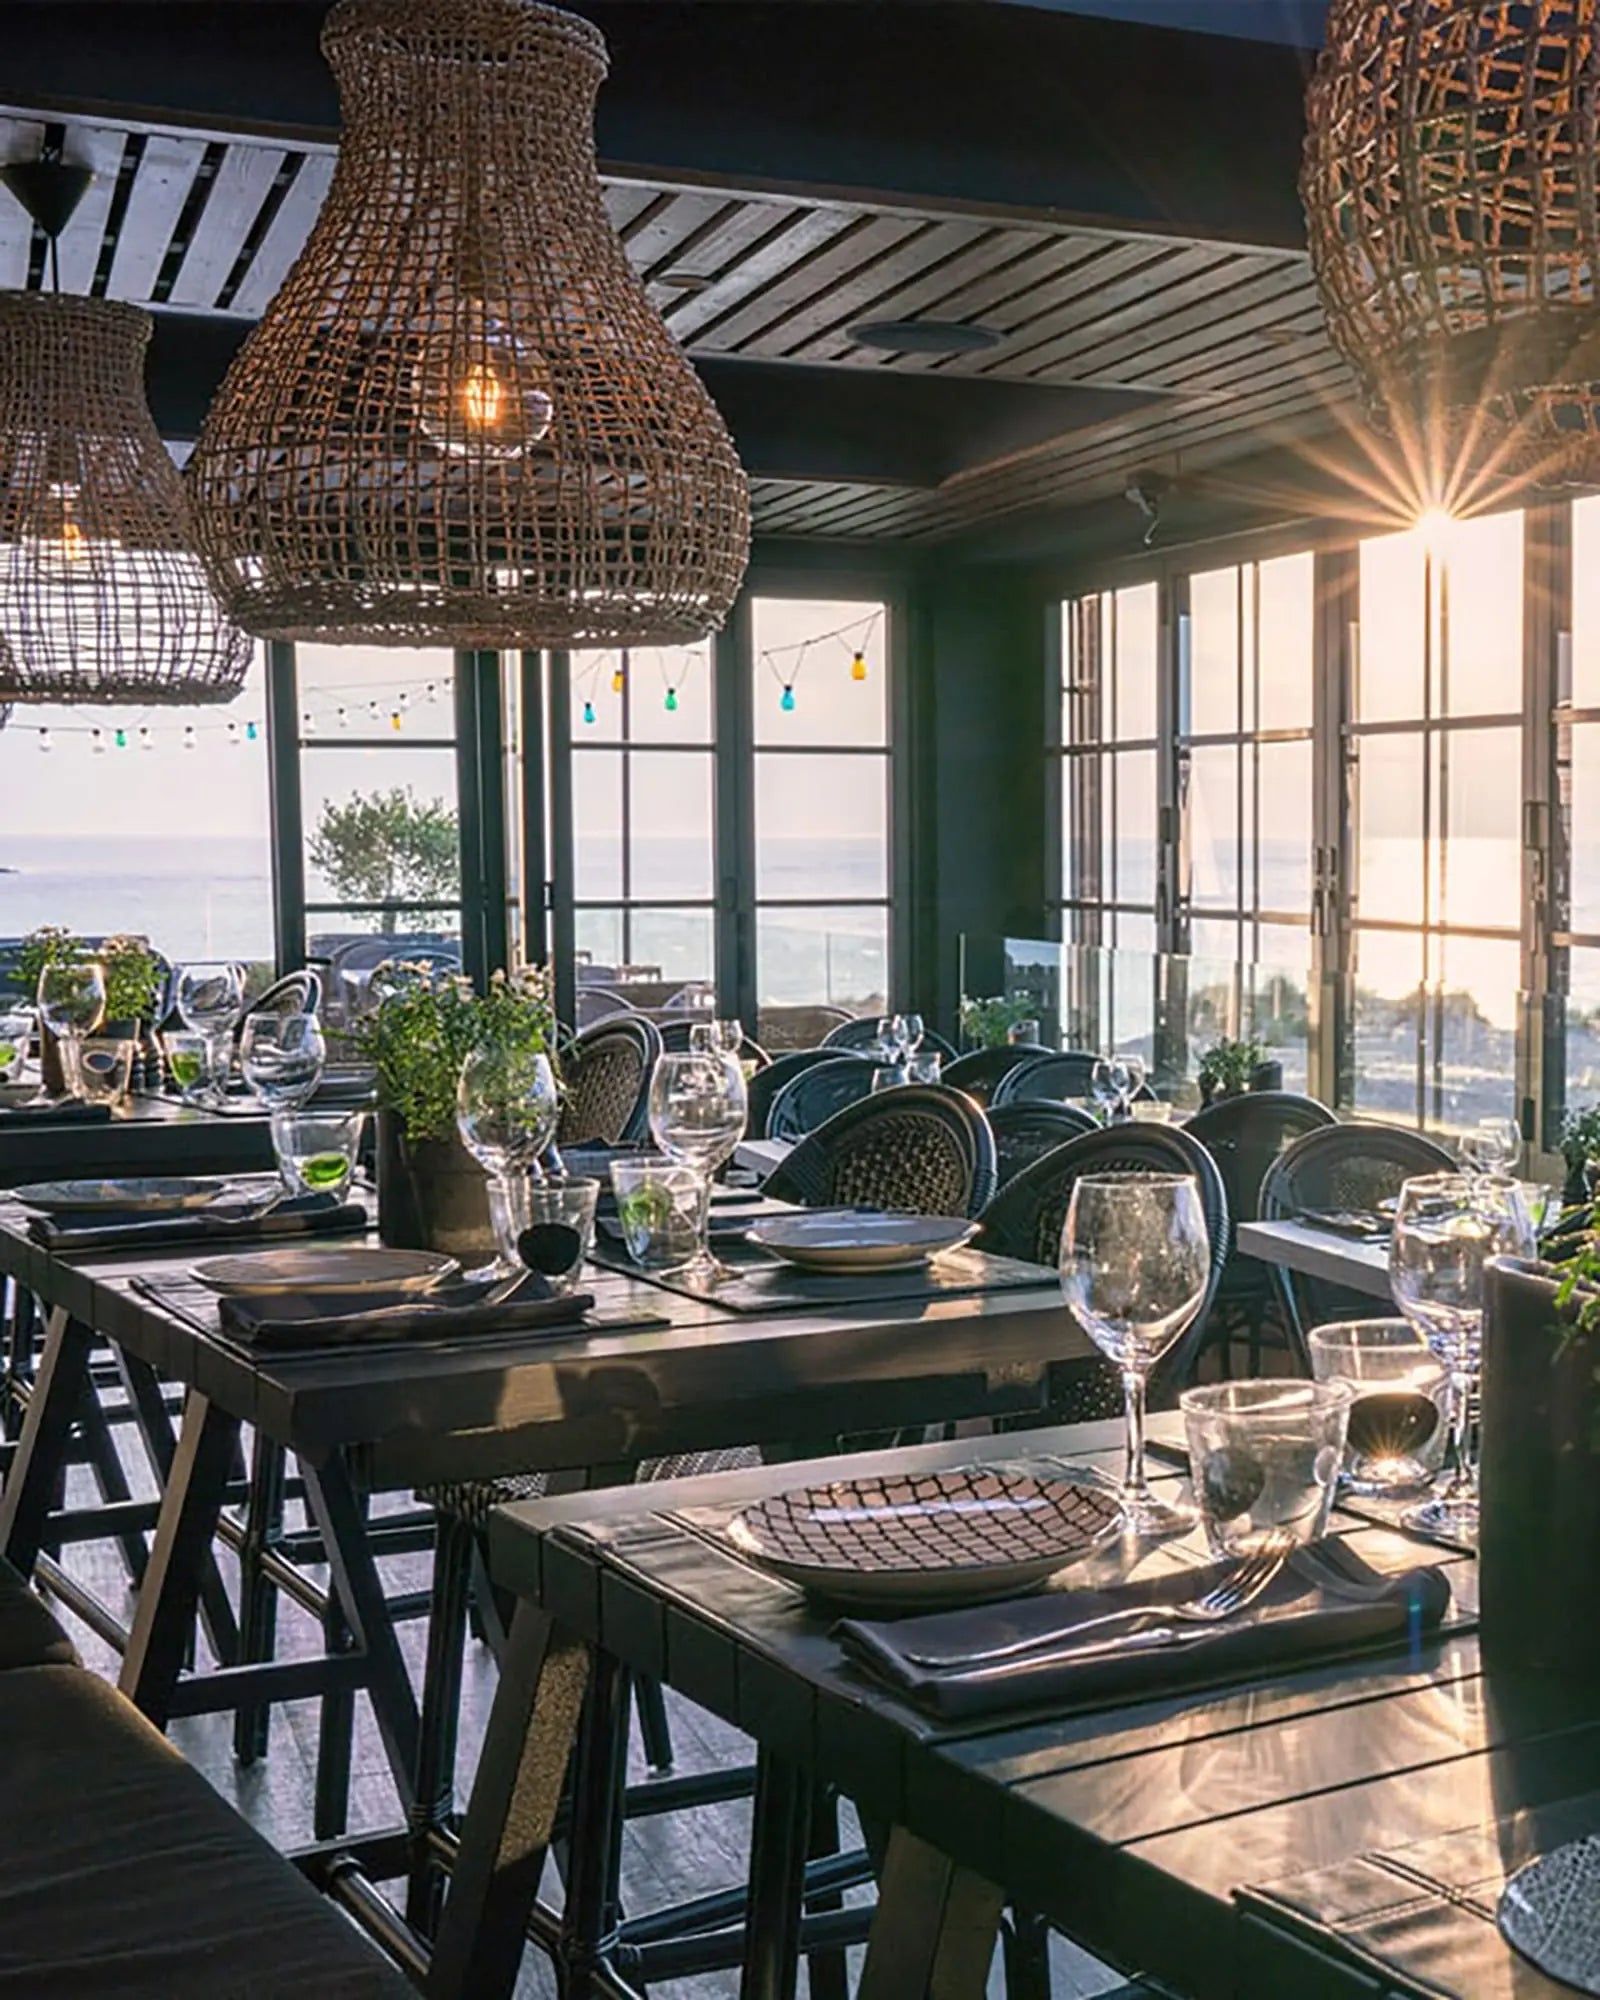 Seagrass organic pendant light above tables in a restaurant